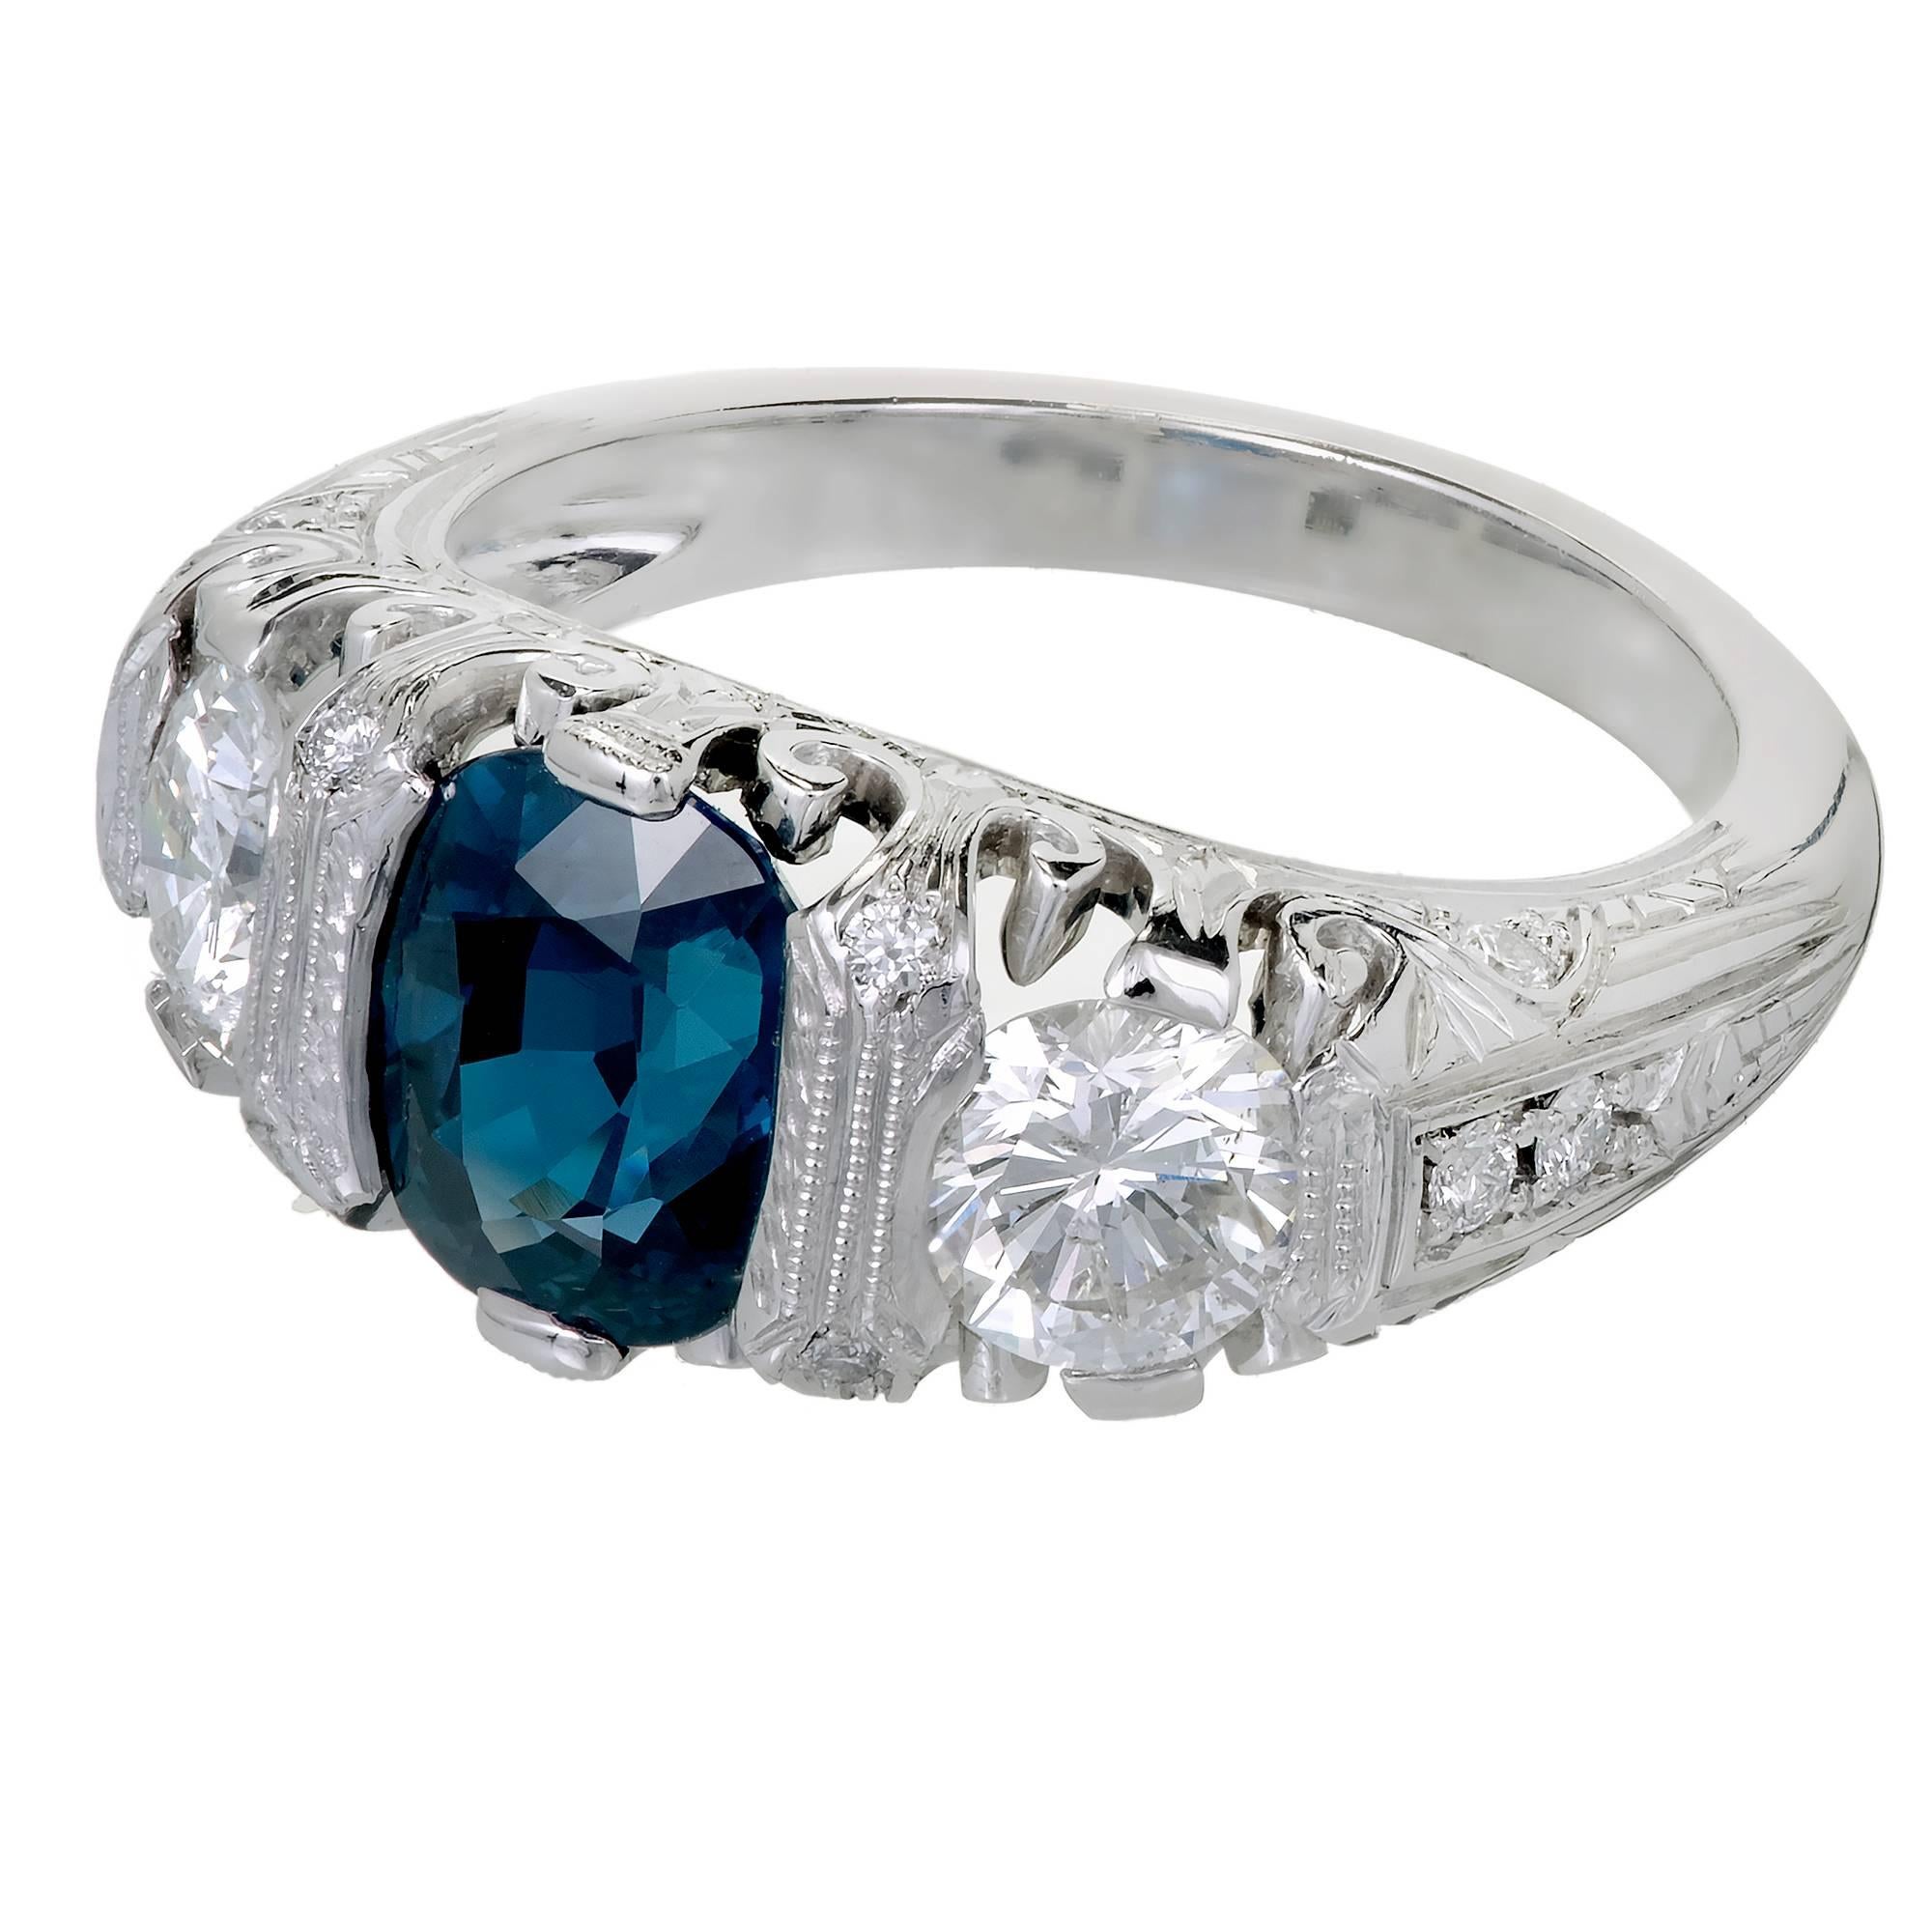 Peter Suchy Designs antique inspired Platinum engagement ring. Styled after an original 1900’s handmade 3 stone dome ring and made with the same handmade techniques. The center Sapphire is an antique cushion cut GIA graded Sapphire as natural, no